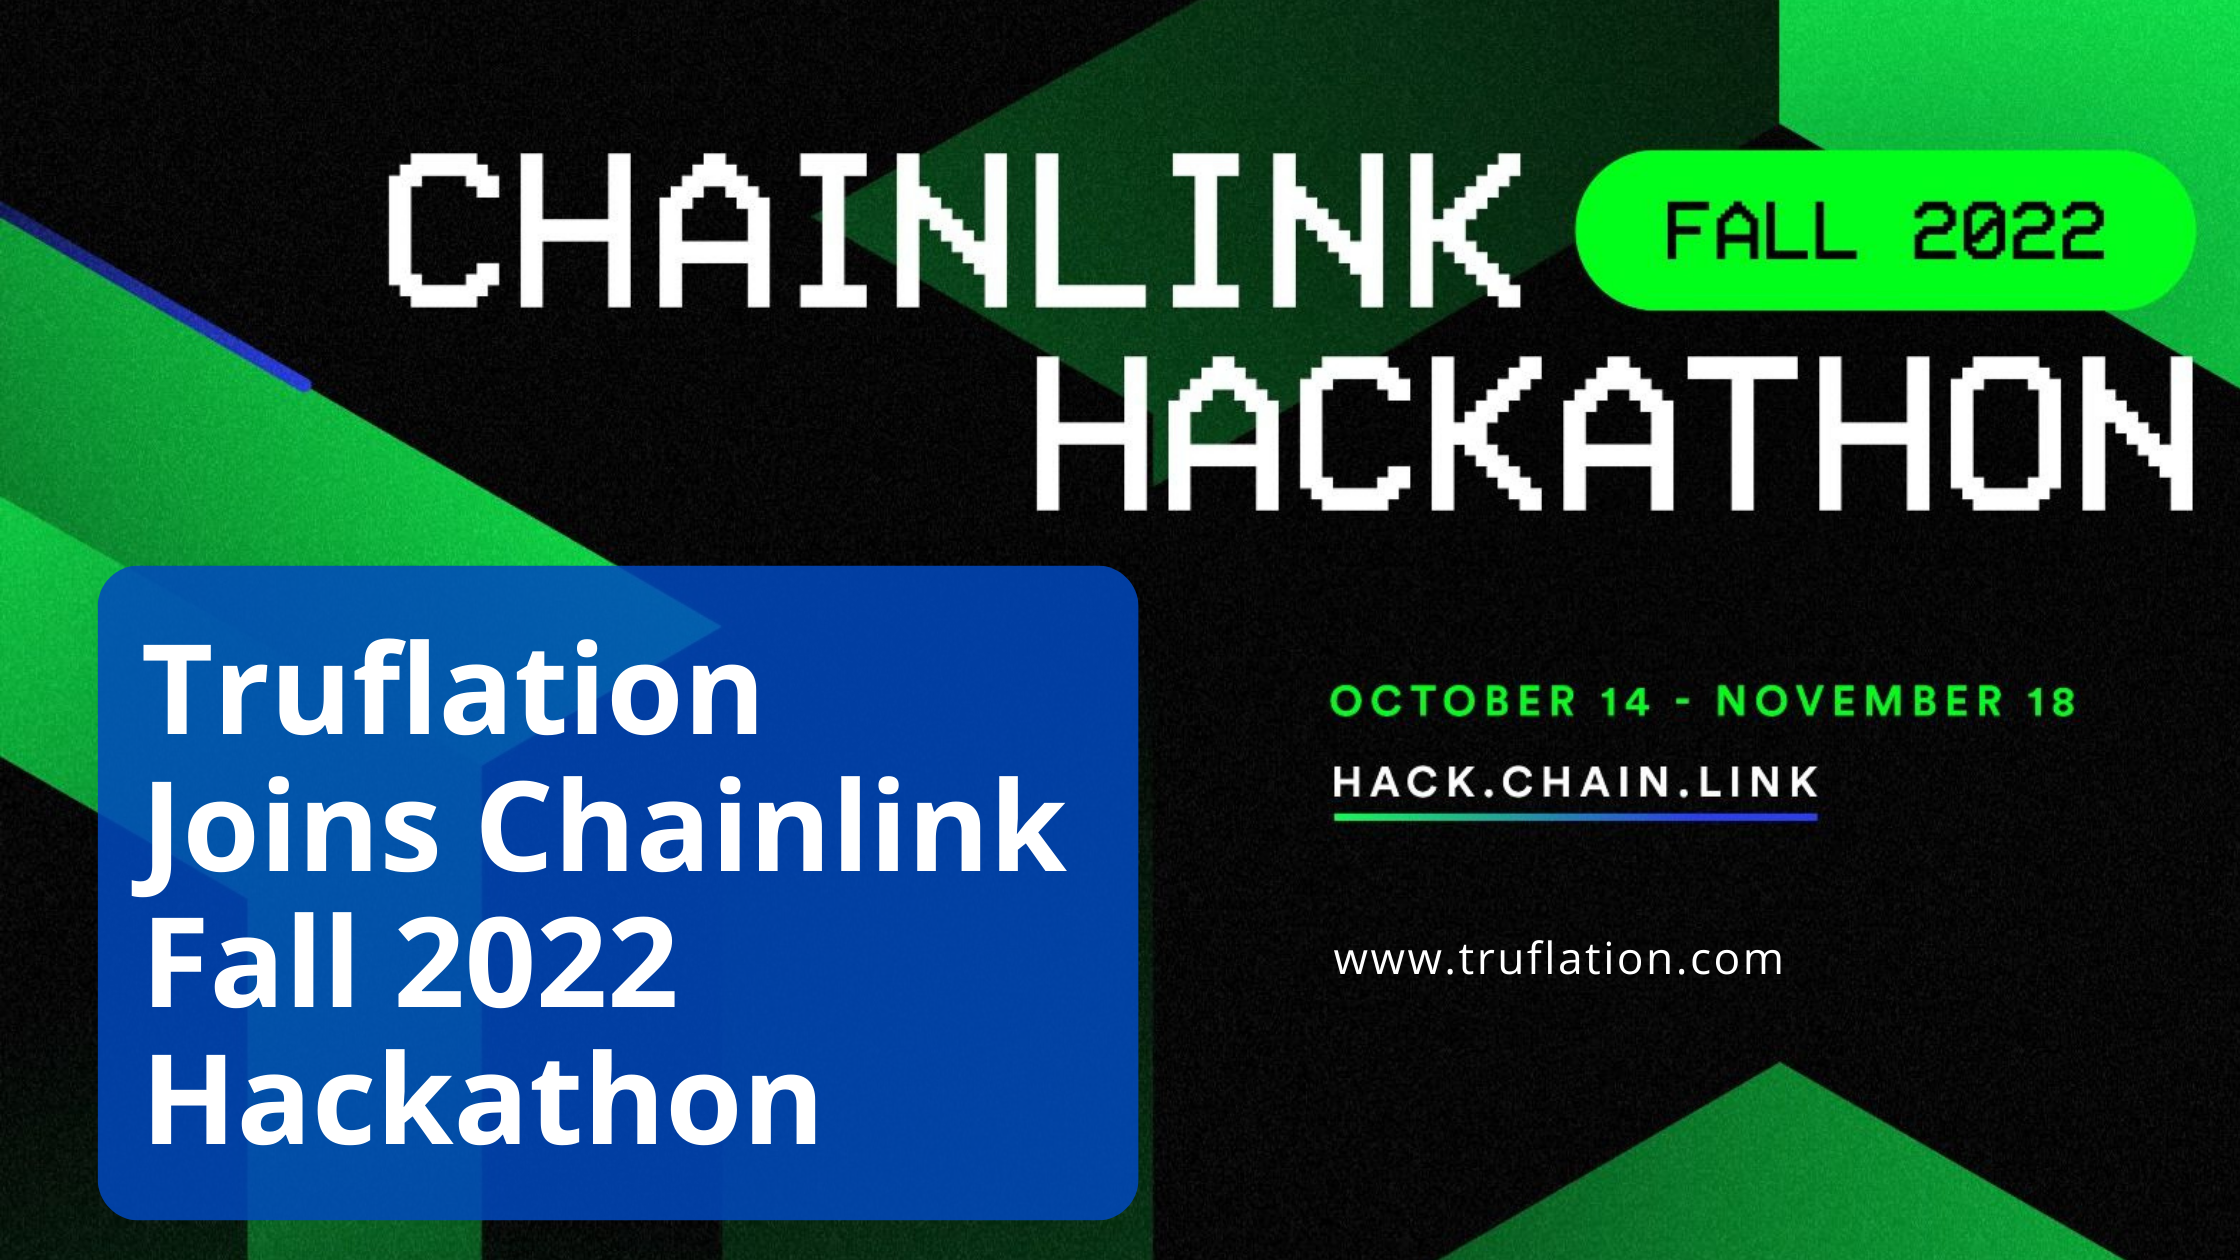 Truflation Joins Chainlink Fall 2022 Hackathon as a Sponsor